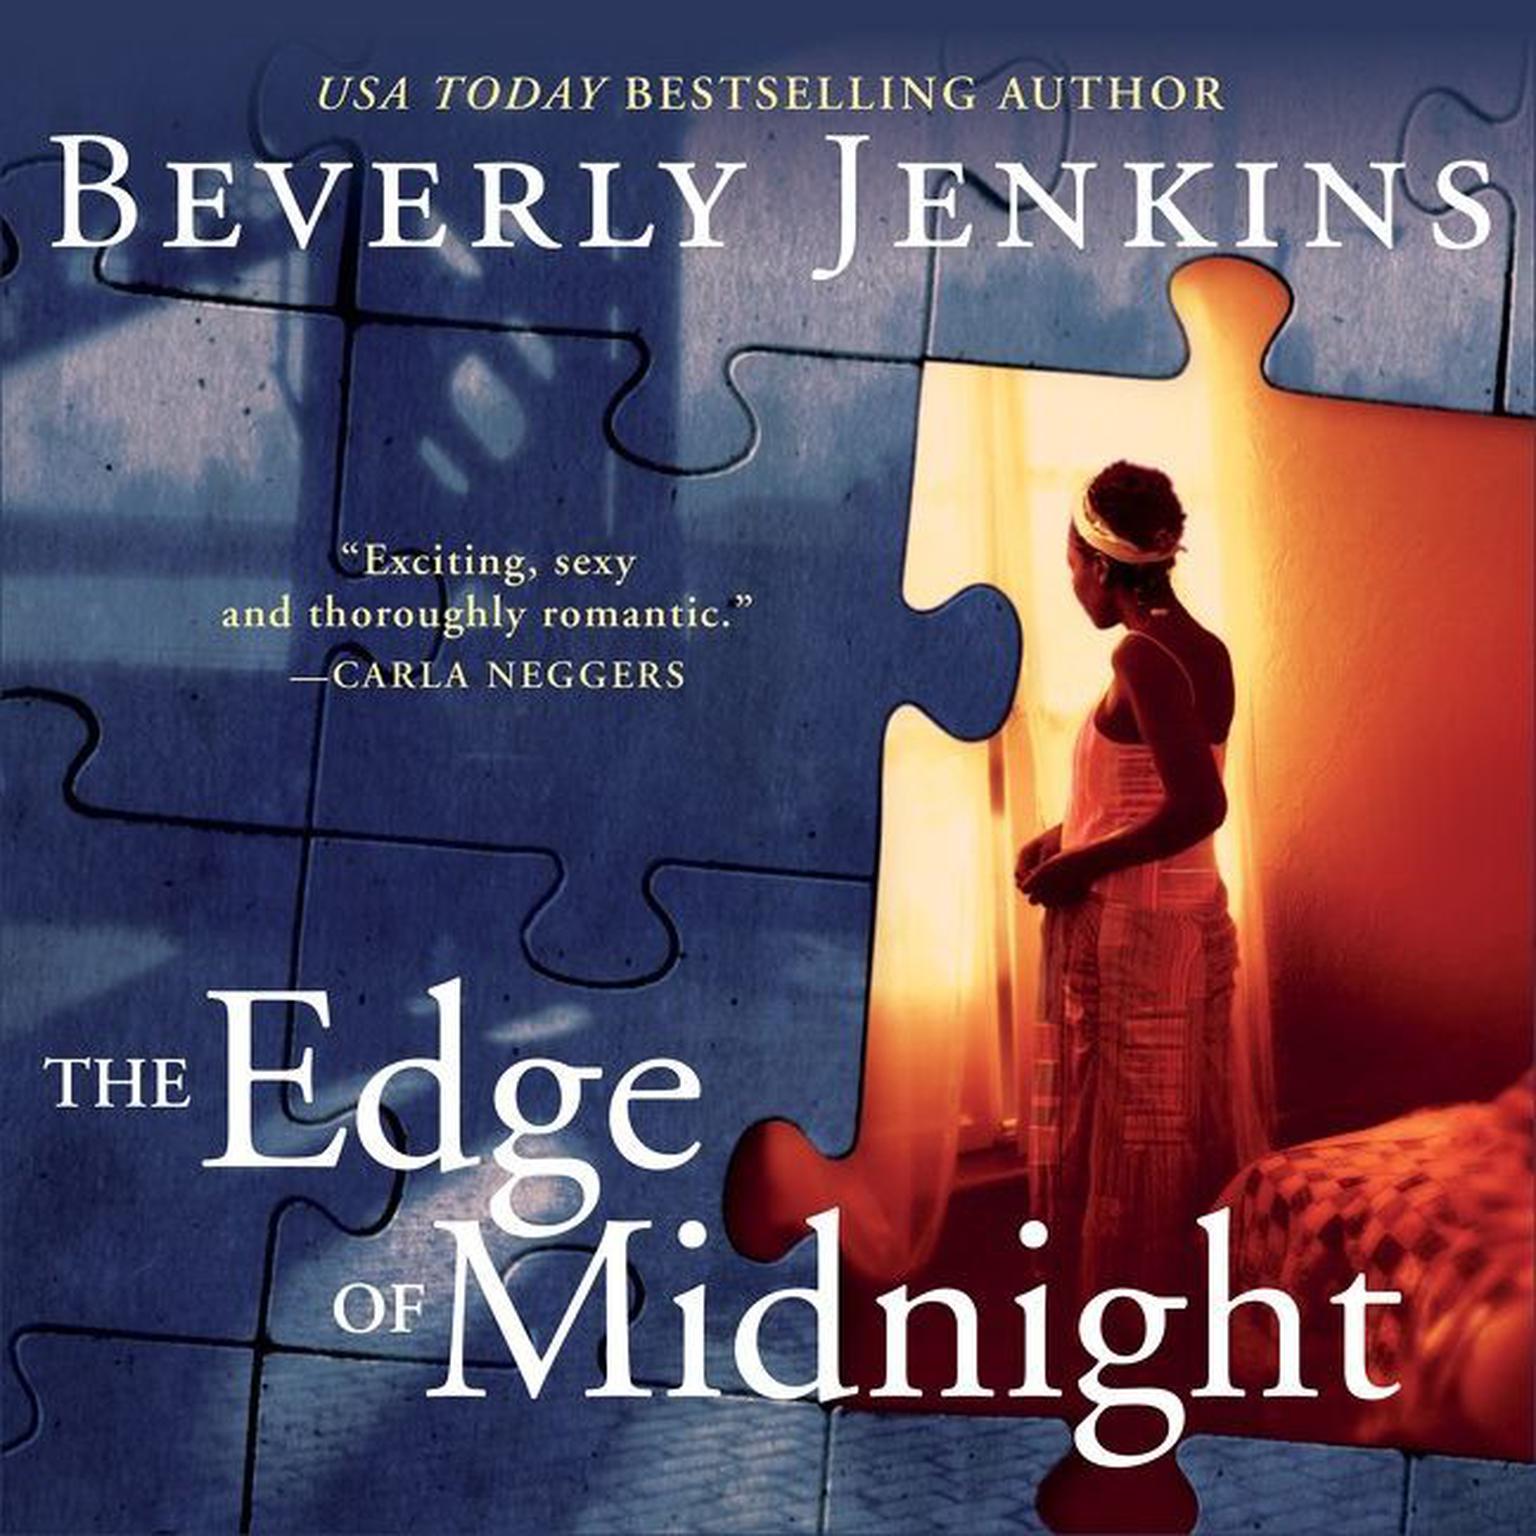 The Edge of Midnight: A Novel Audiobook, by Beverly Jenkins